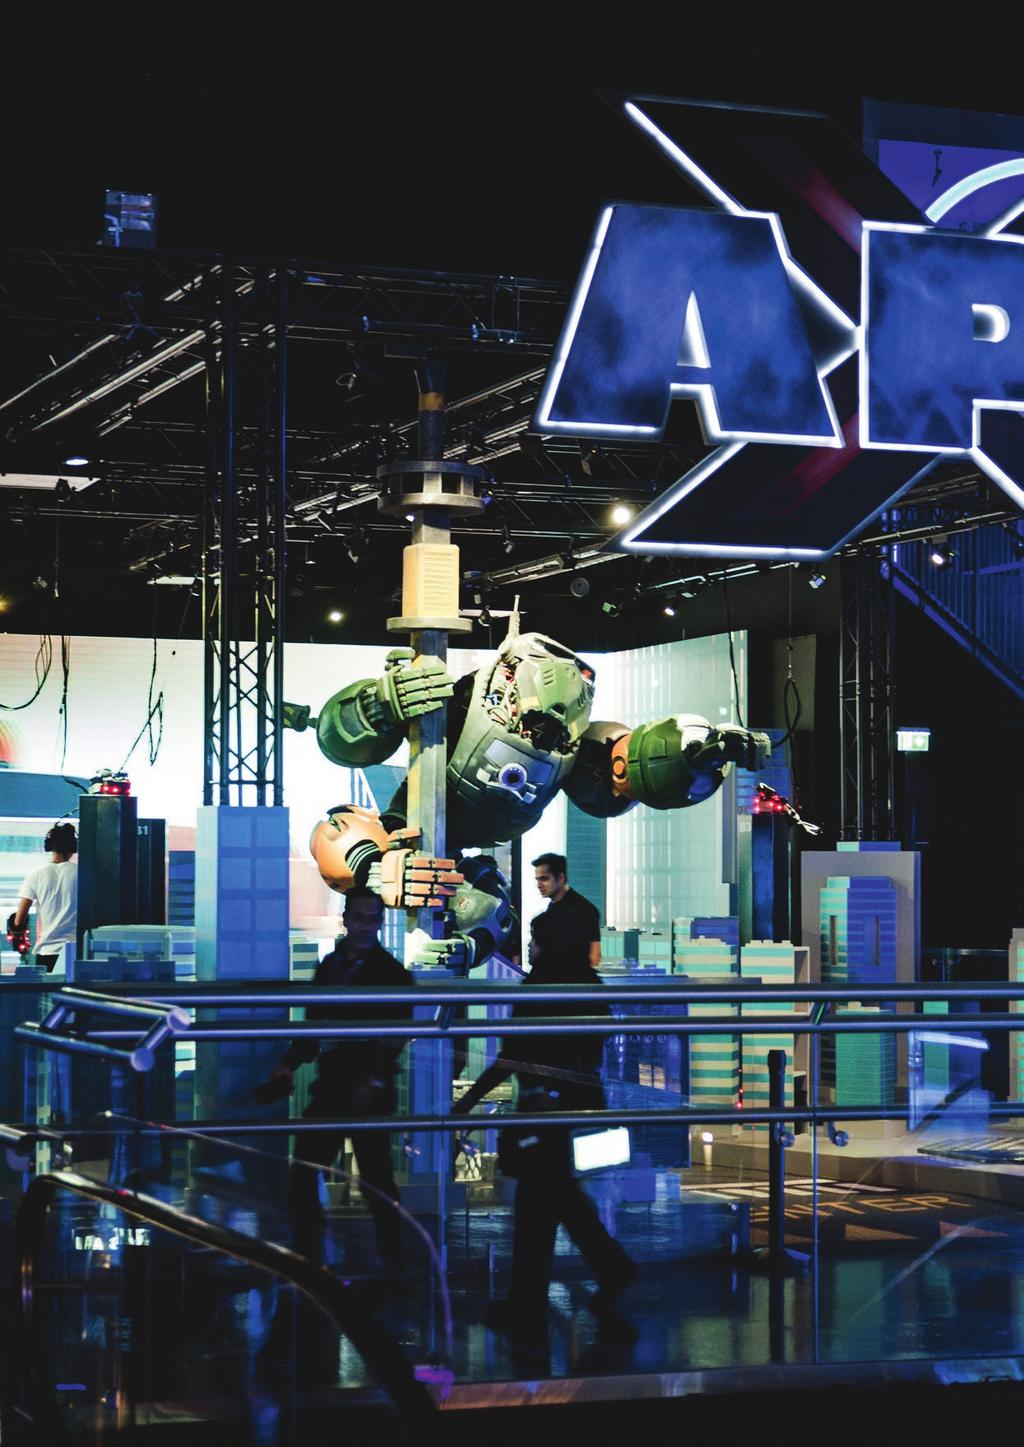 The VR park at the Dubai Mall for which Starbreeze is the lead